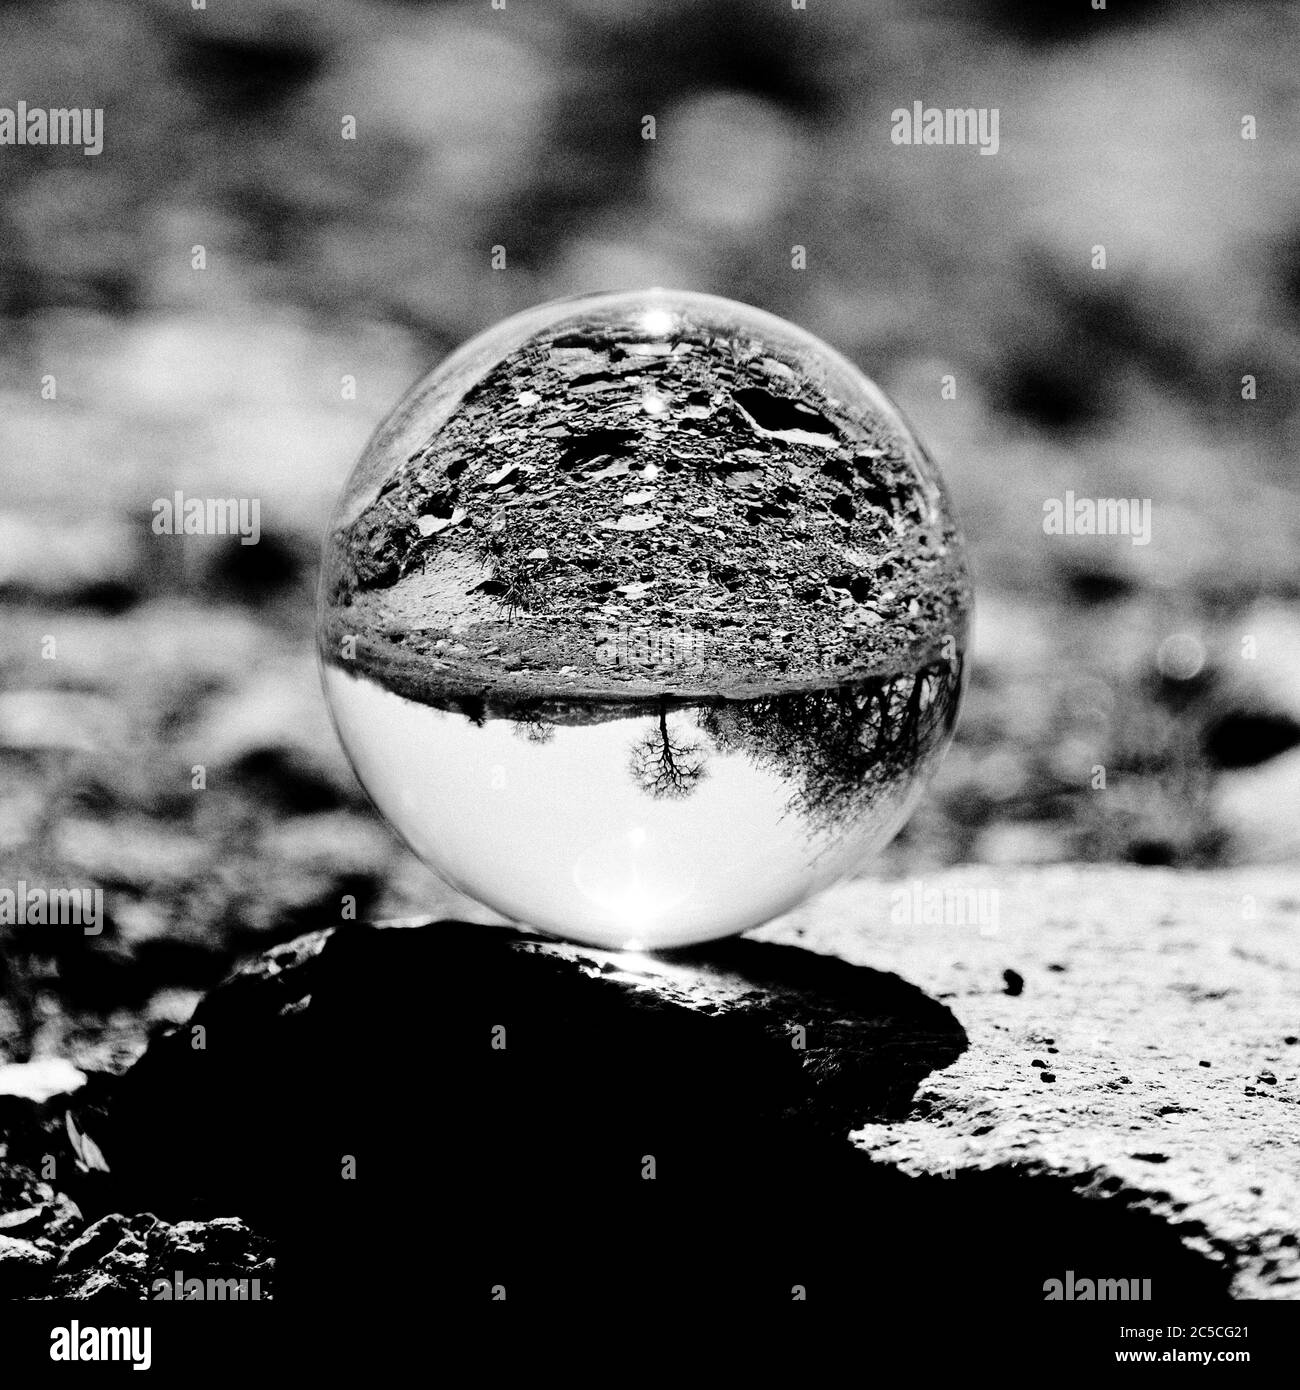 Grayscale shot of a tree reversely reflecting in a crystal ball on a blurred background Stock Photo